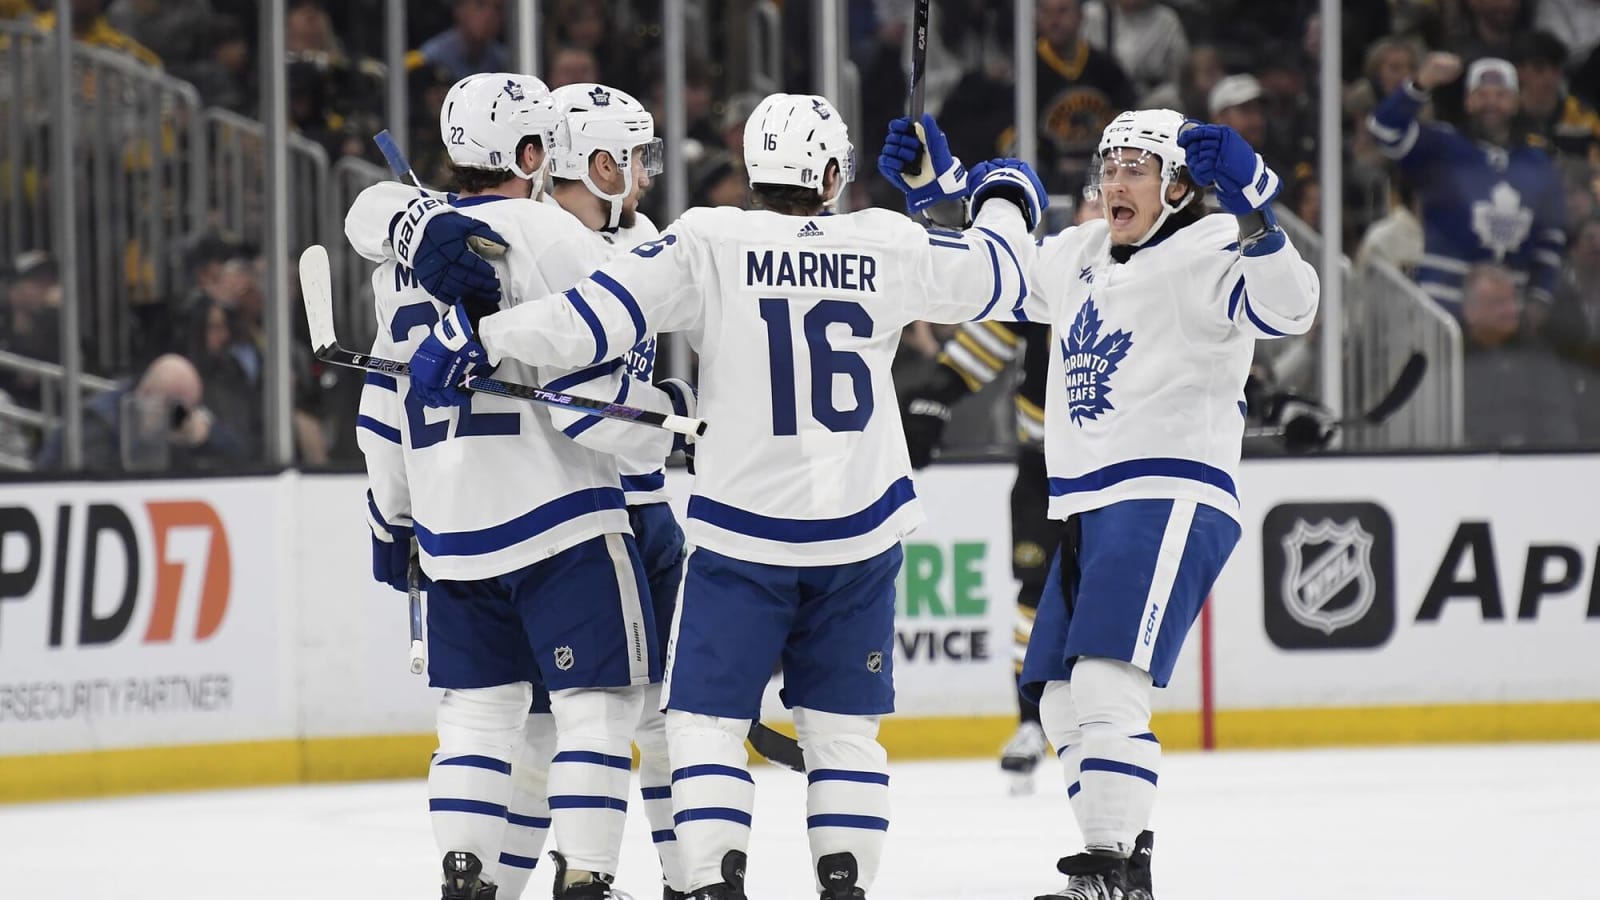 Knies scores overtime winner as Maple Leafs defeat Bruins 2-1 and force Game 6